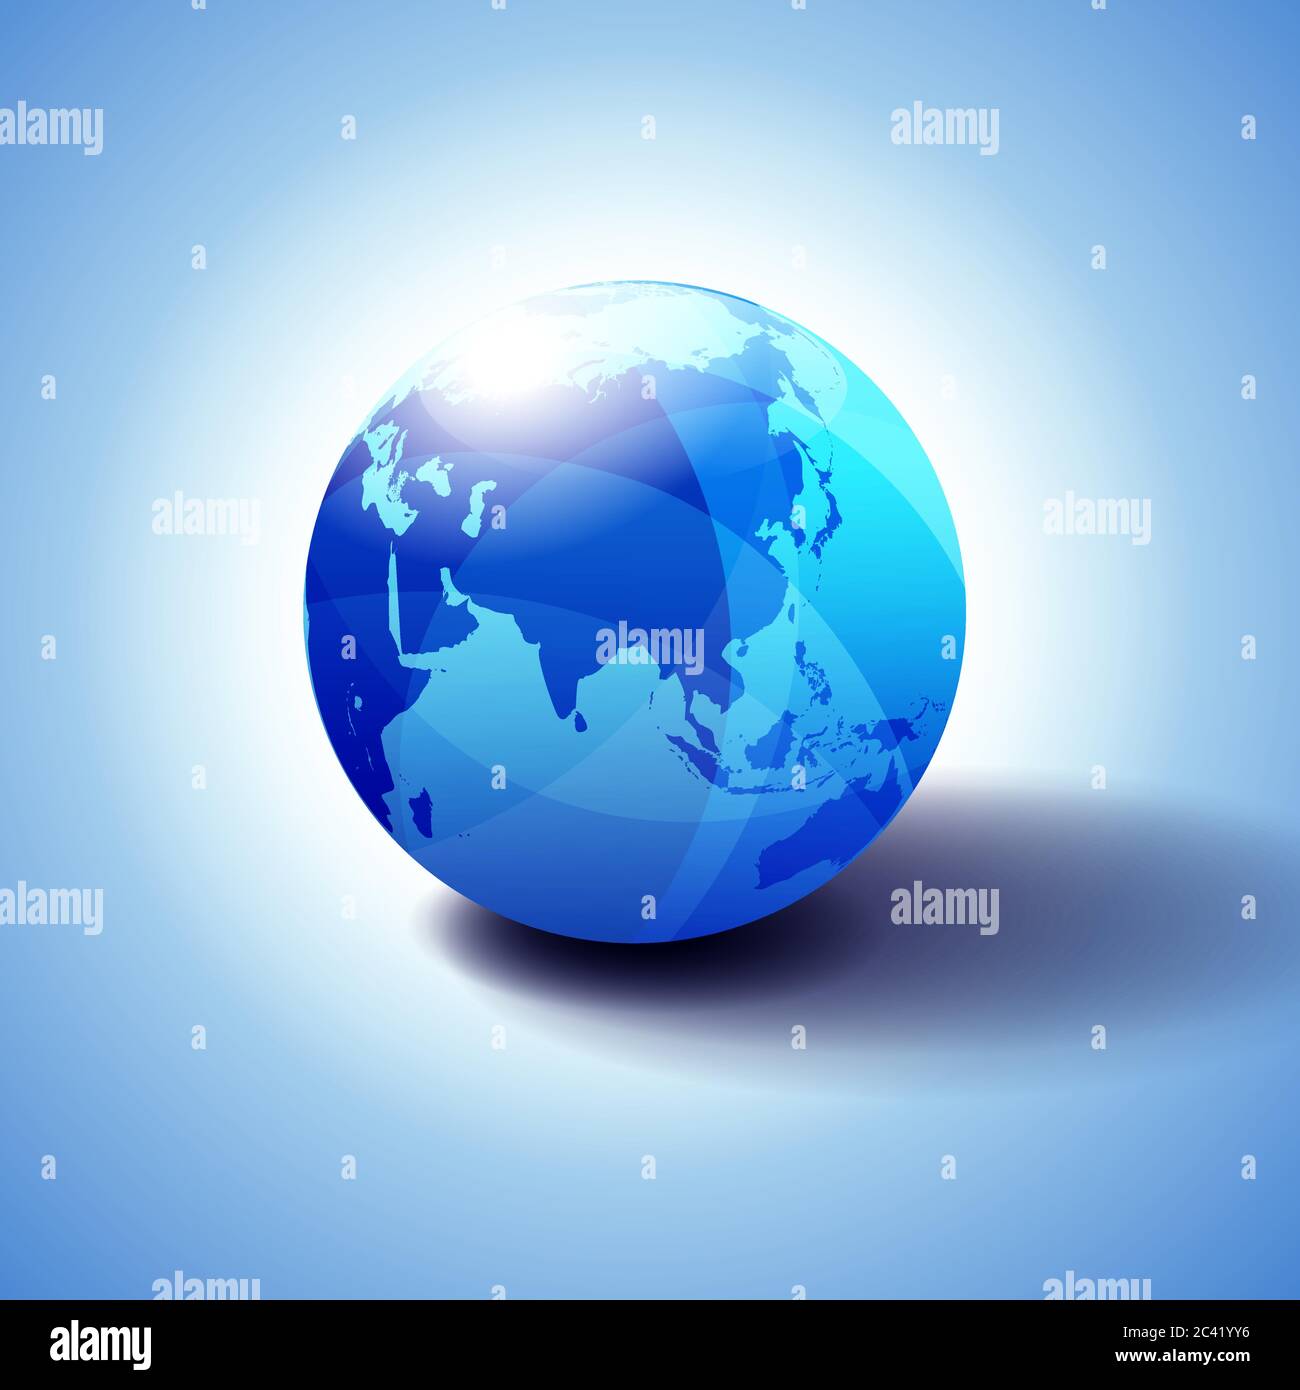 China, Asia and Japan Global World Globe Icon 3D illustration, Glossy, Shiny Sphere with Global Map in Subtle Blues giving a transparent feel Stock Vector